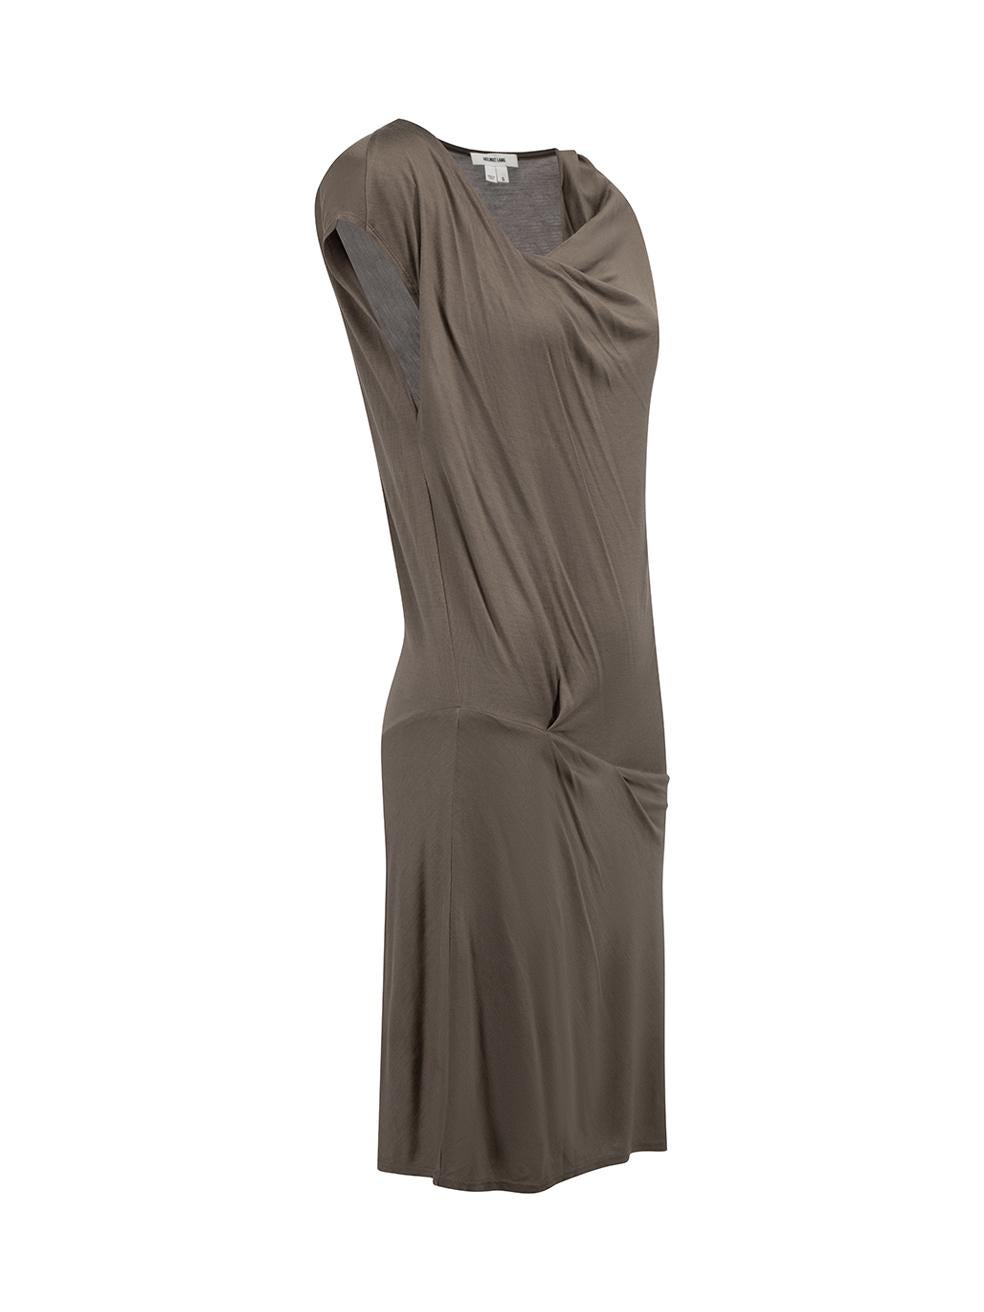 CONDITION is Very good. Minimal wear to dress is evident. Minimal wear to the front with pulls to the weave on this used Helmut Lang designer resale item. 



Details


Grey

Viscose

Knee length dress

Cowl neckline

Drape